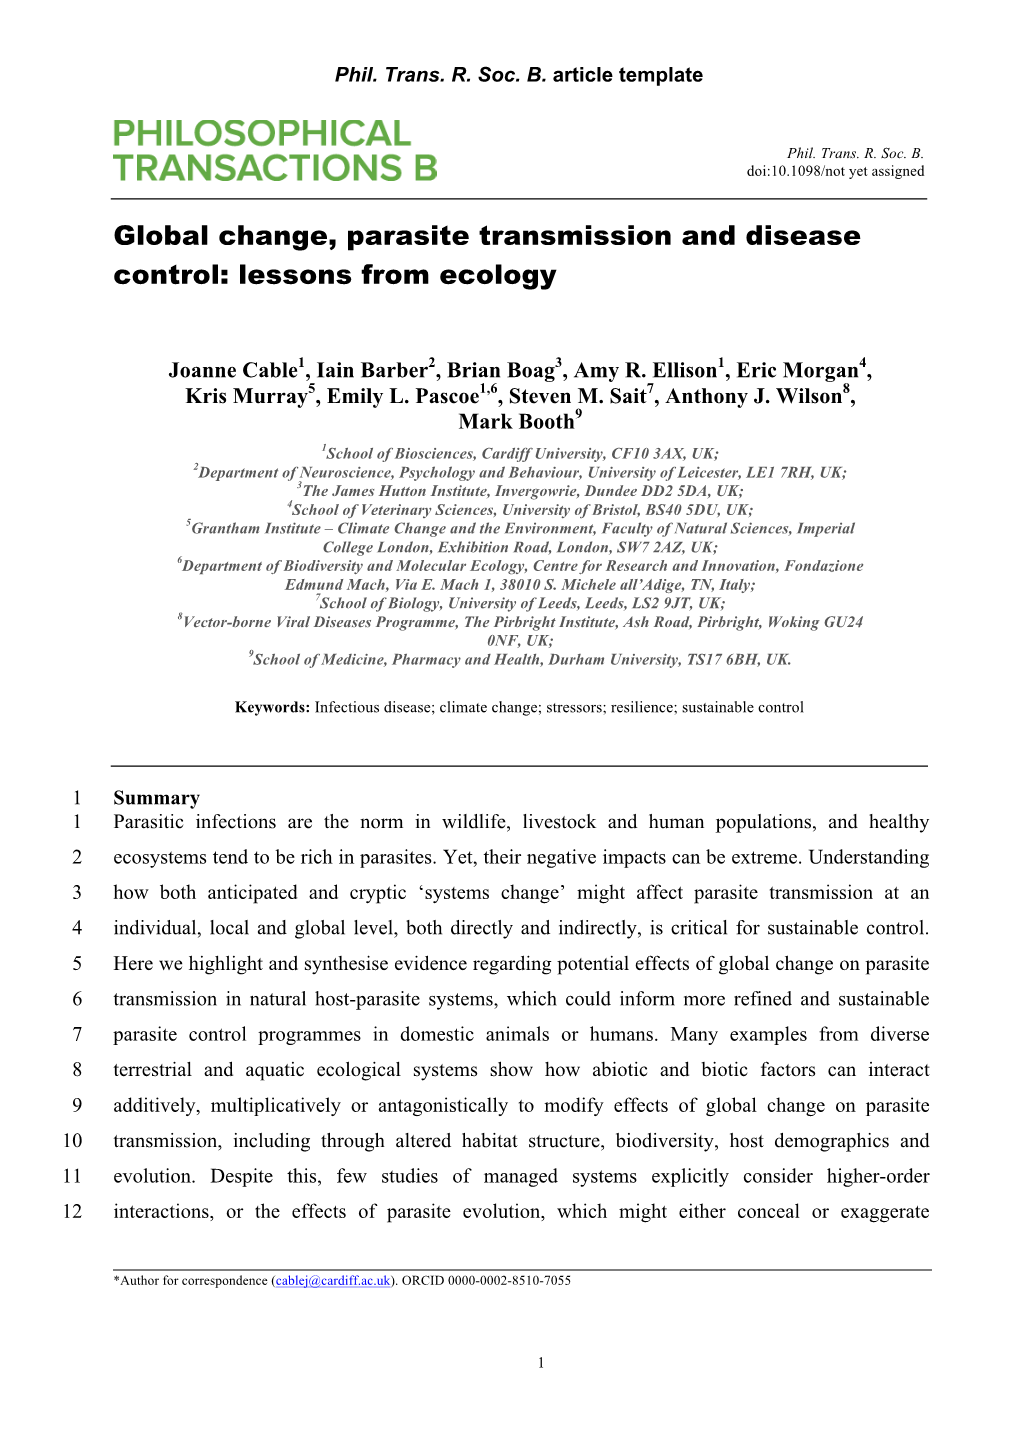 Global Change, Parasite Transmission and Disease Control: Lessons from Ecology